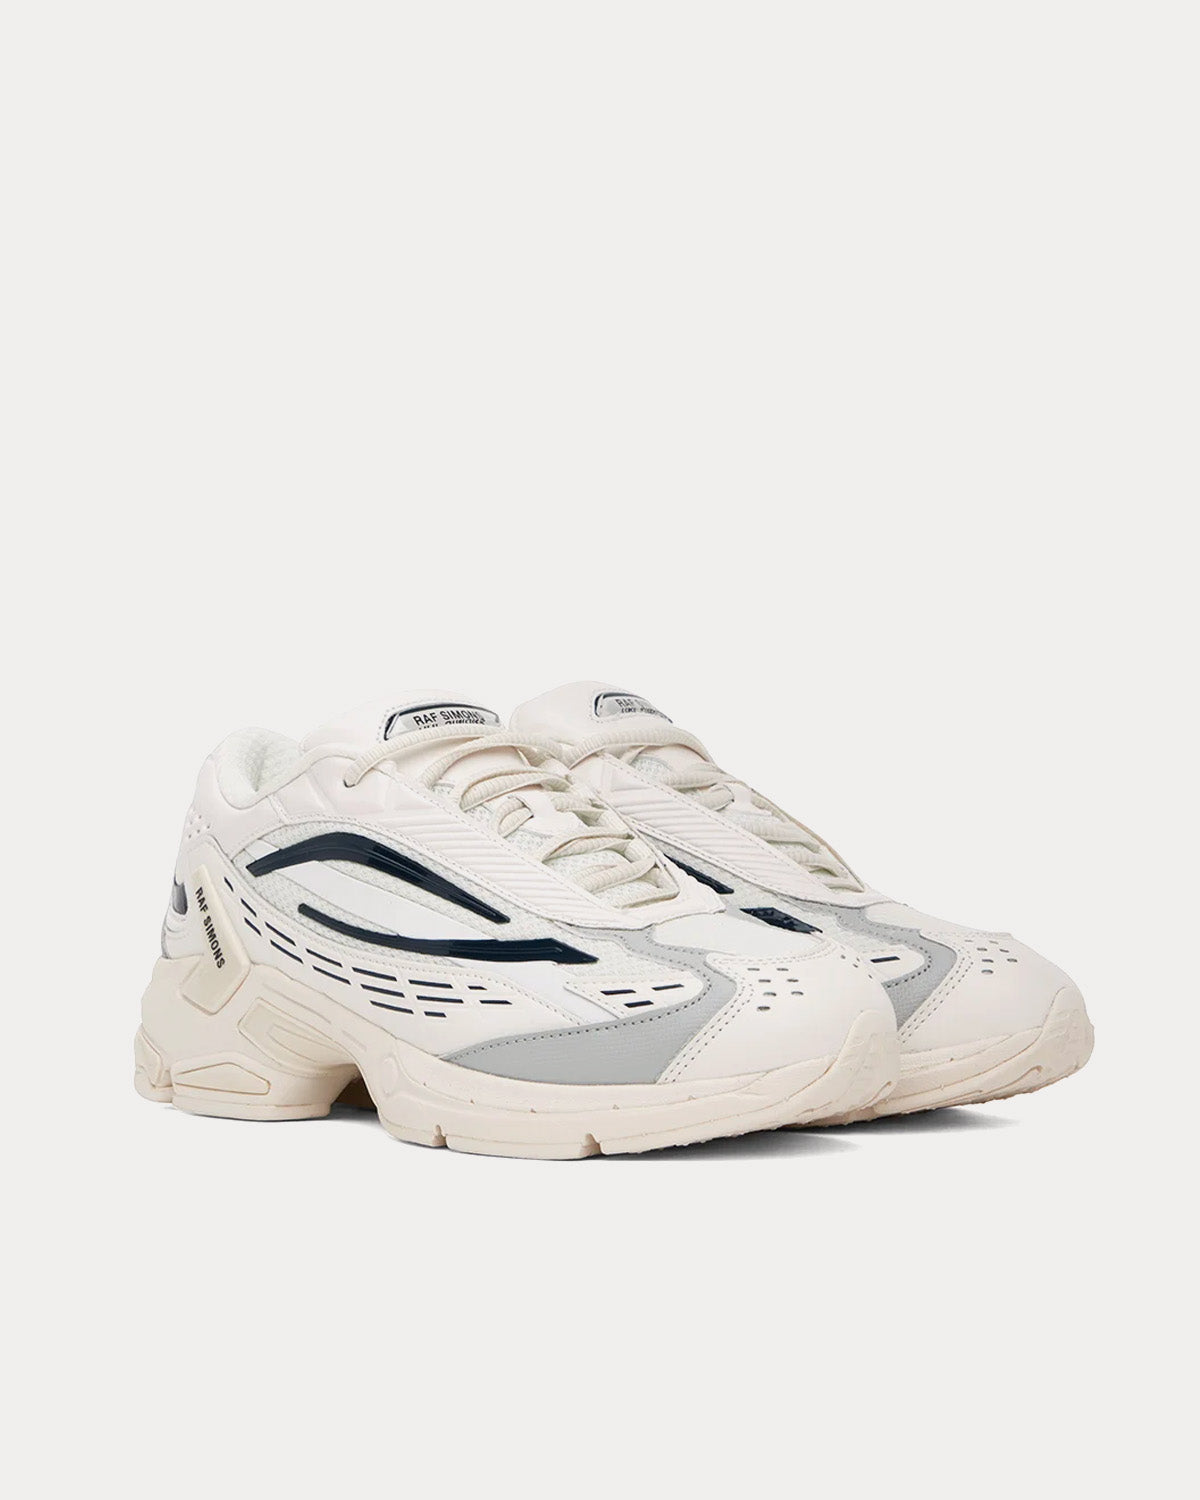 Raf Simons - Ultrasceptre Off-White / Grey Low Top Sneakers